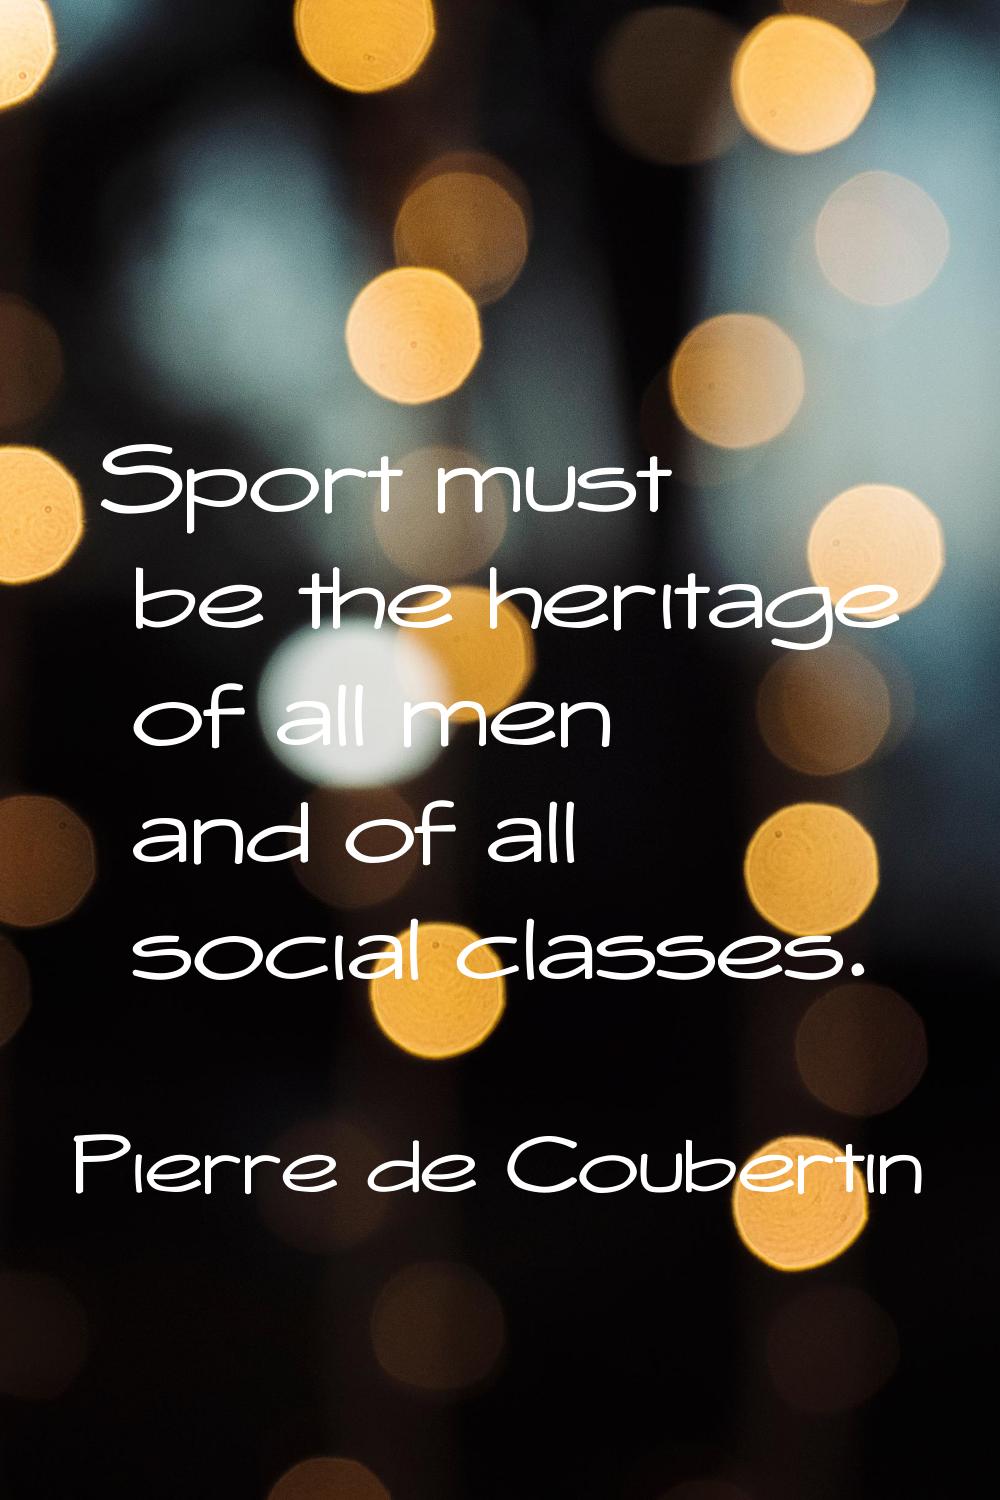 Sport must be the heritage of all men and of all social classes.